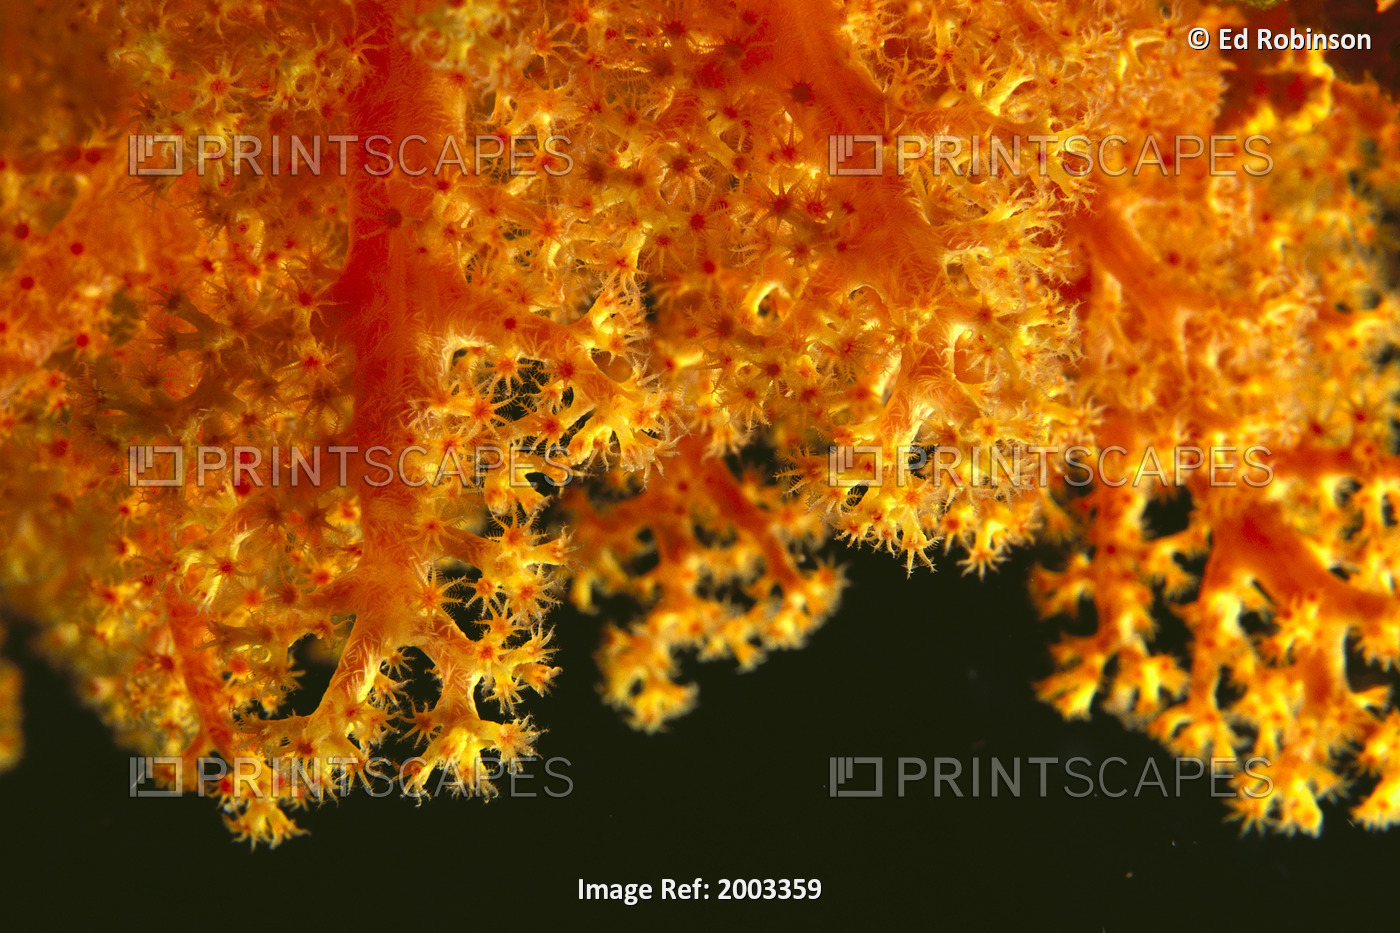 Solomon Islands, Close-Up Of Orange Soft Coral With Polyps Showing